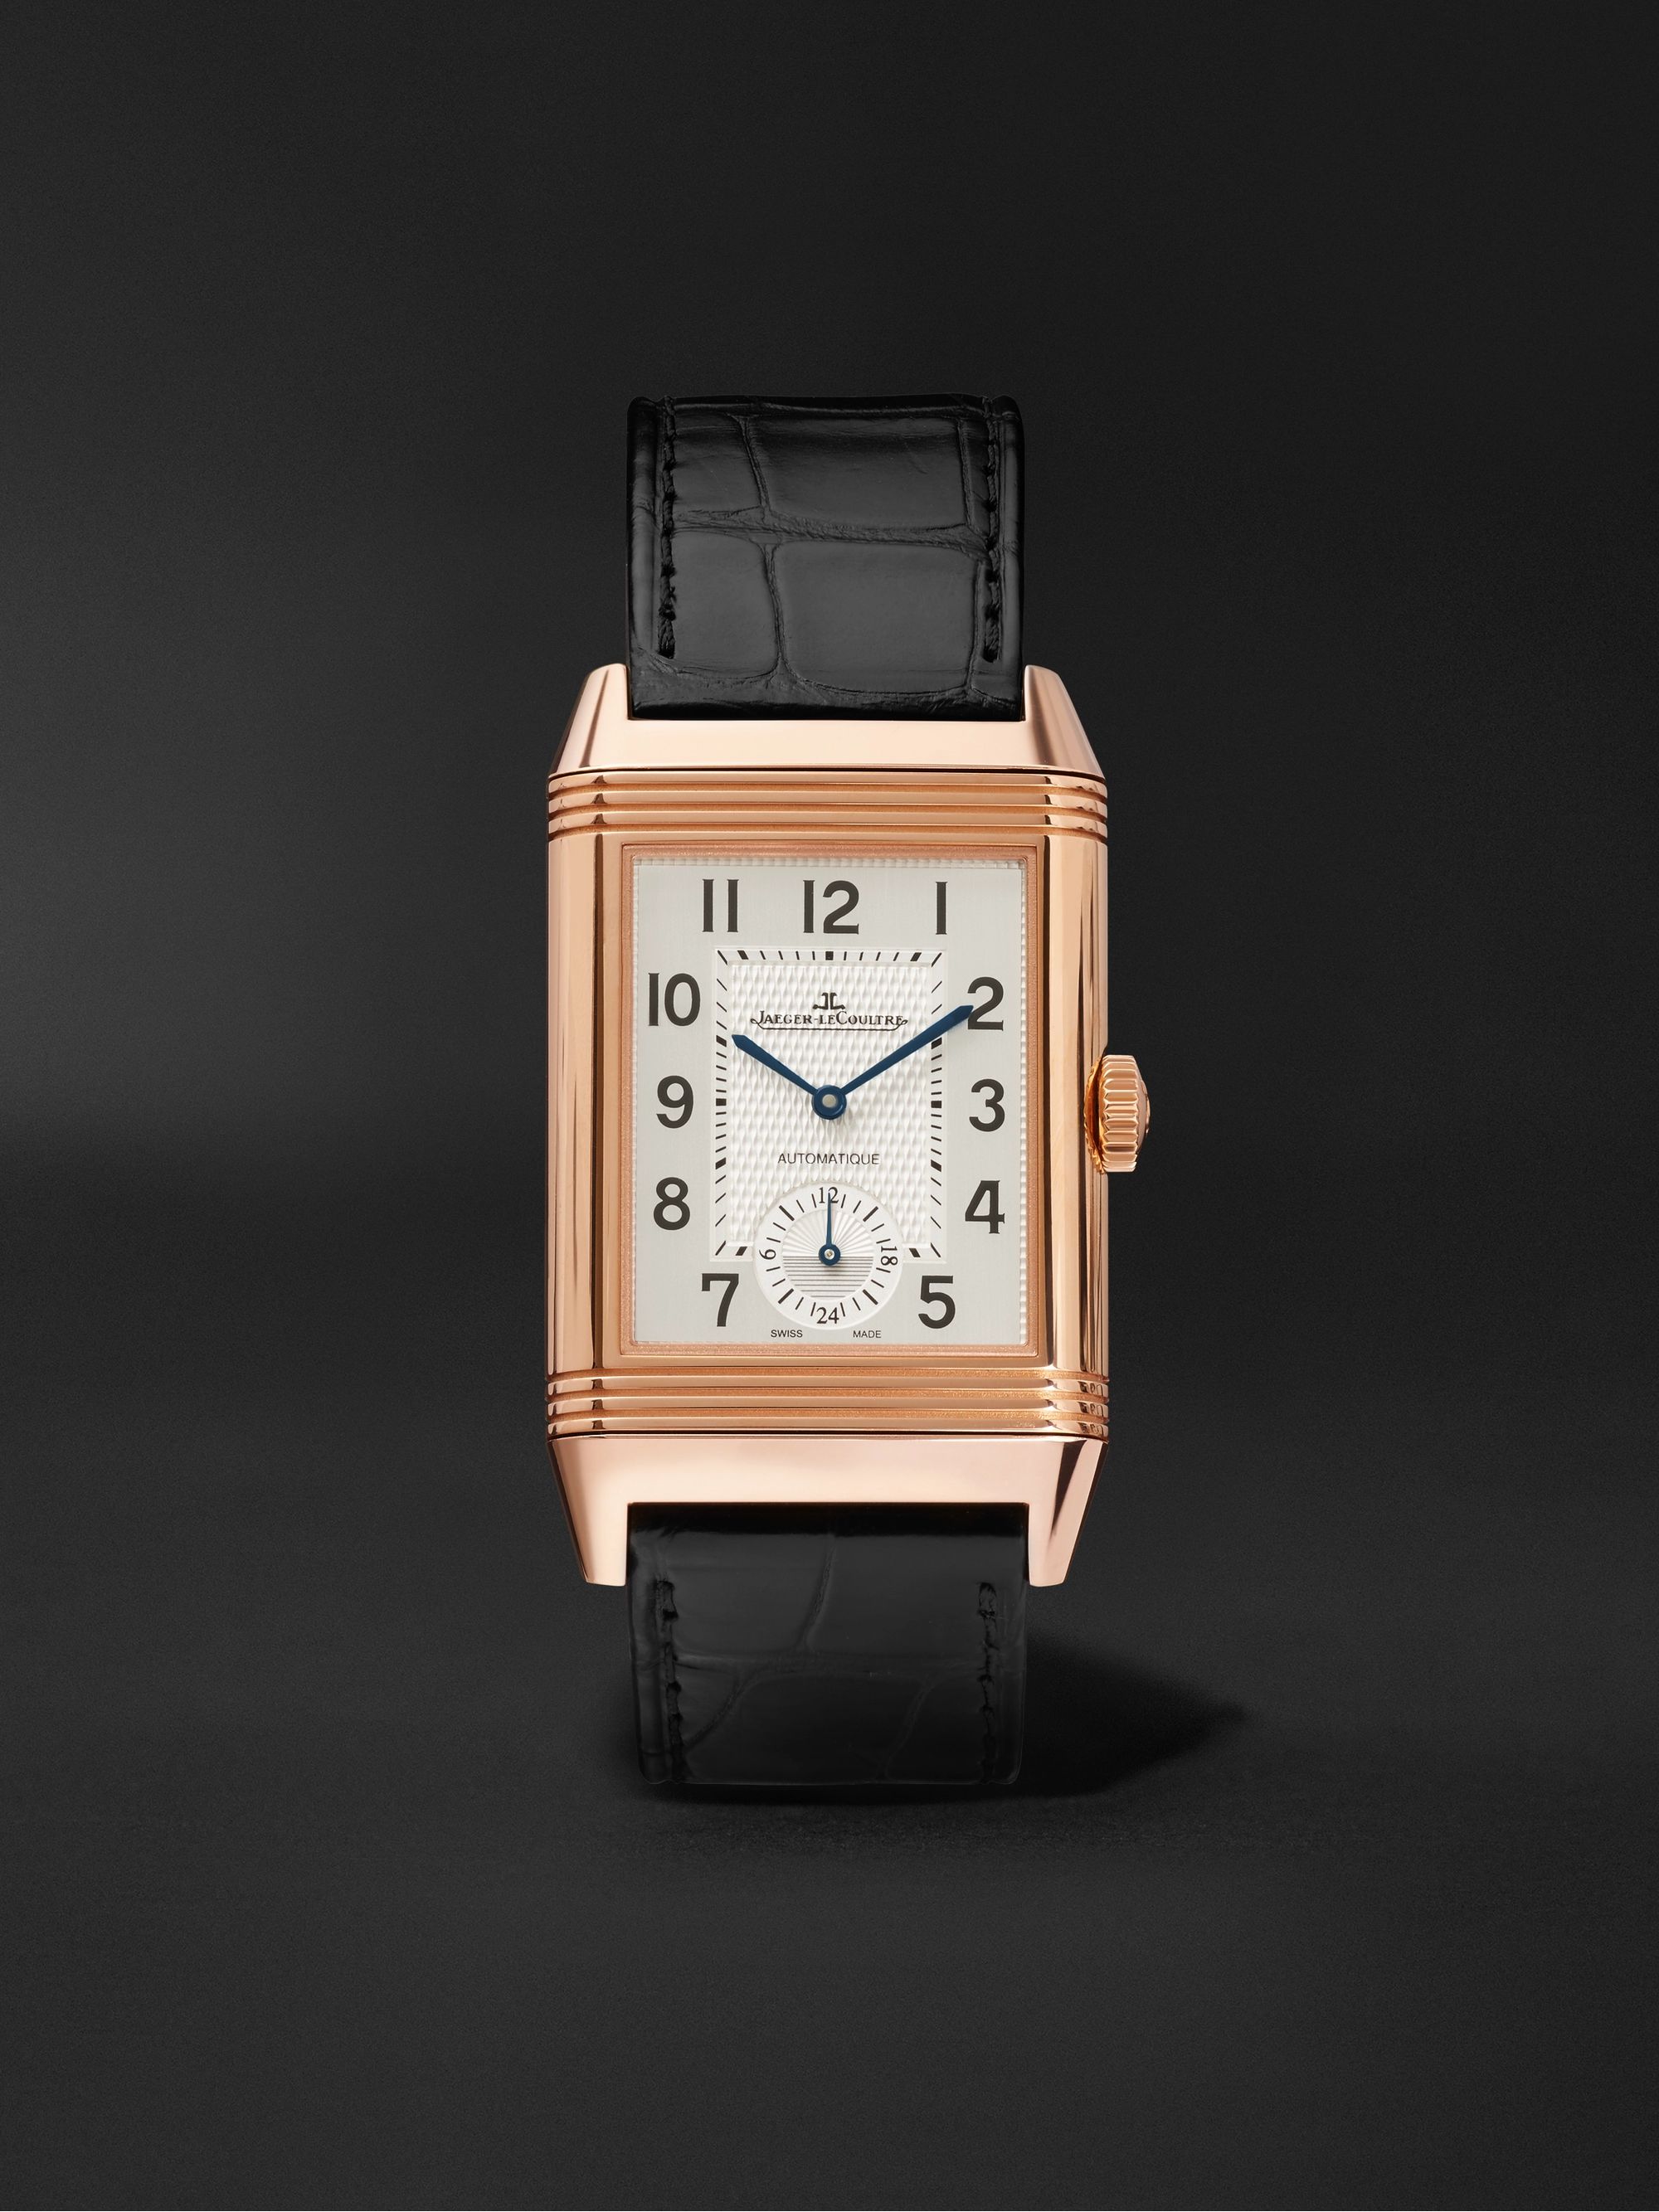 JAEGER-LECOULTRE Reverso Classic Large Duoface Automatic 28mm 18-Karat Rose  Gold and Alligator Watch, Ref. No. Q1368470 | MR PORTER